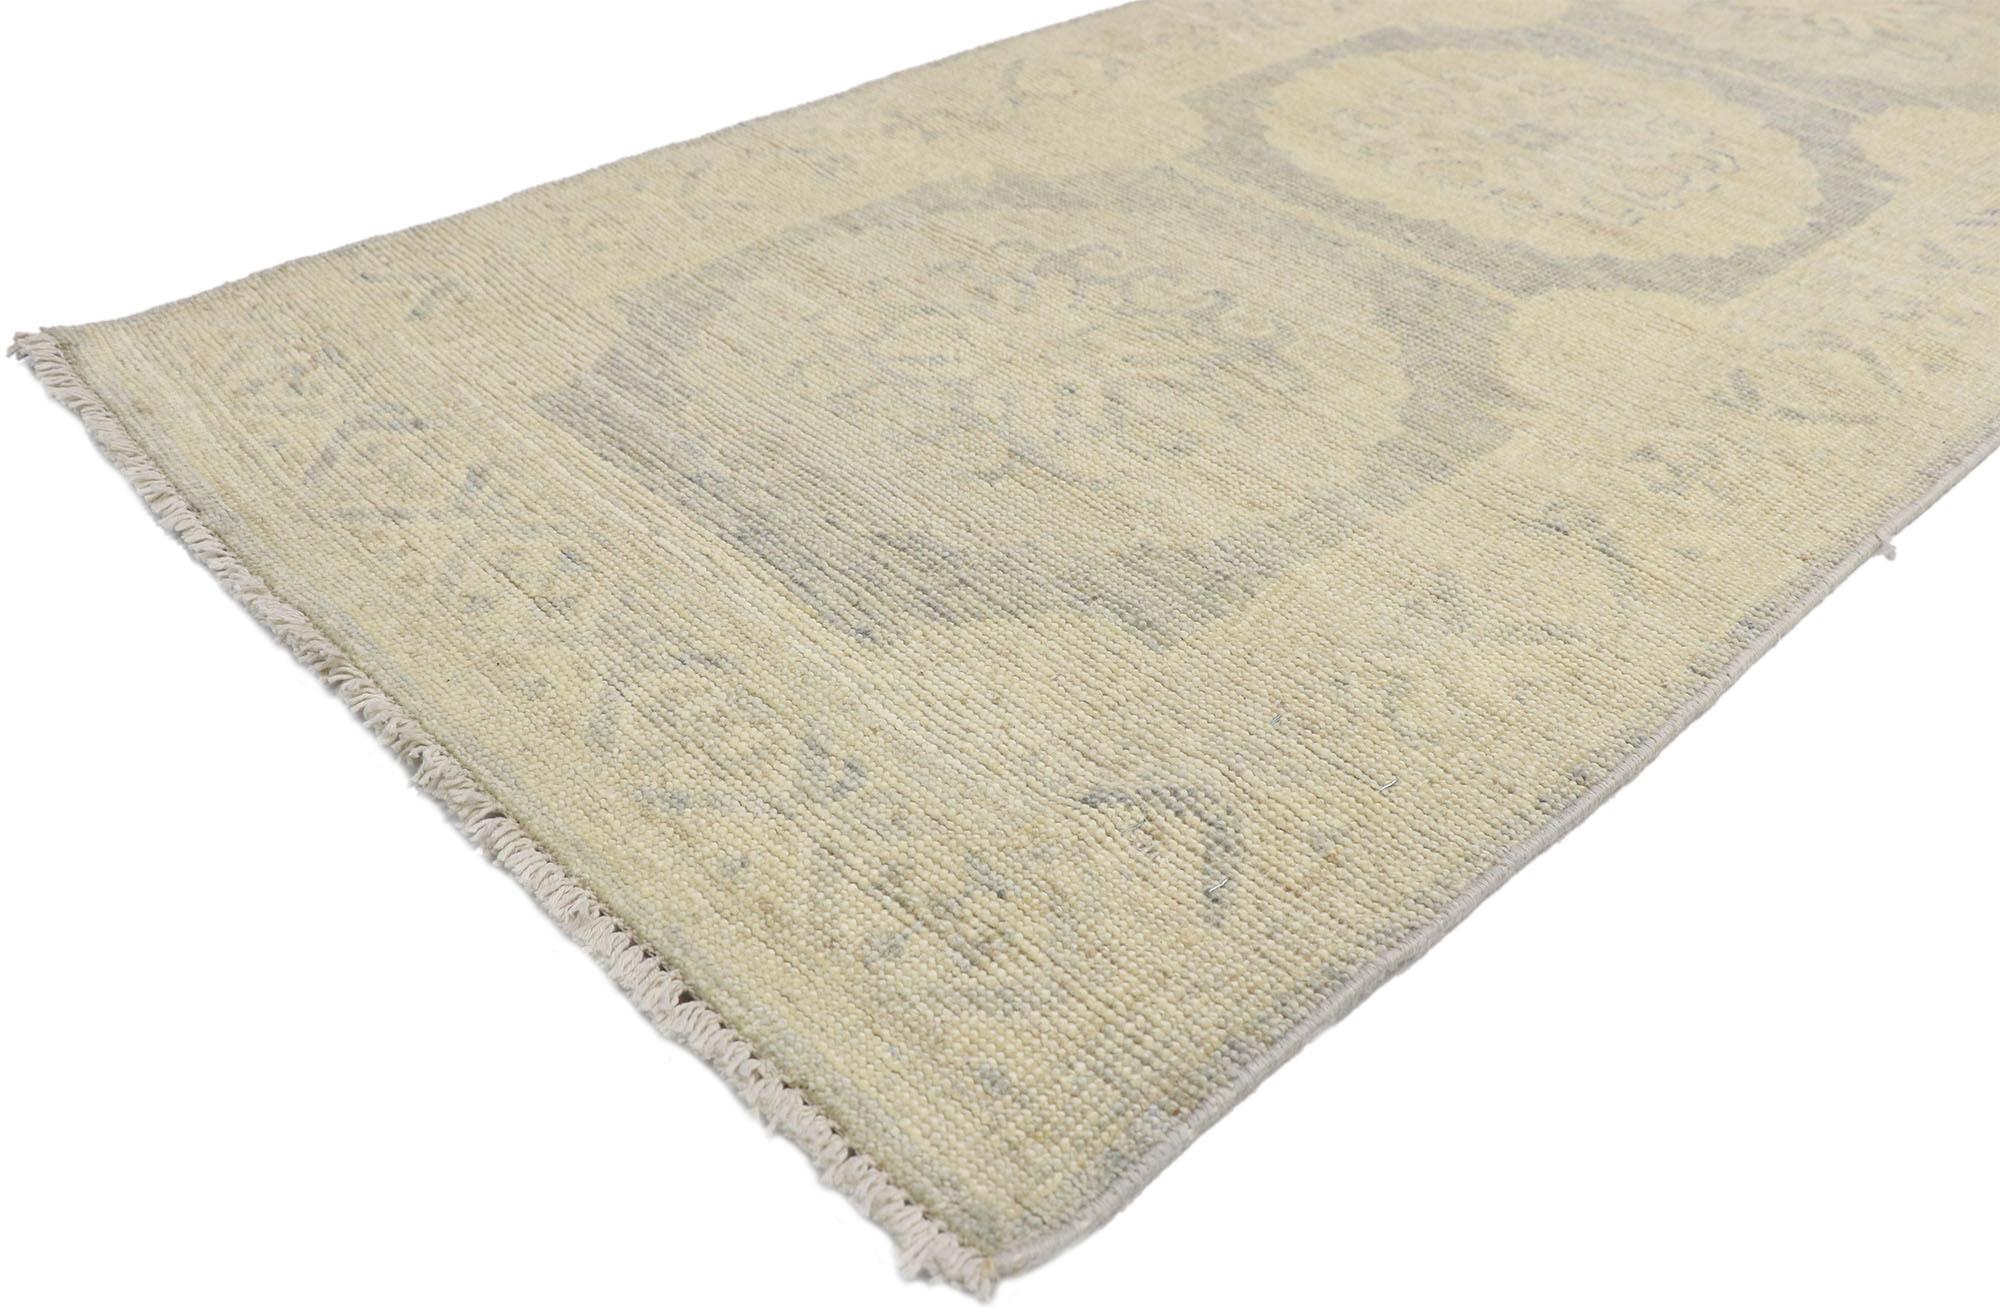 80183 Transitional Khotan style runner, extra-long hallway runner. Blending elements from the modern world with light and airy colors, this hand knotted wool transitional Khotan style runner charms with ease. The abrashed field features a botanical